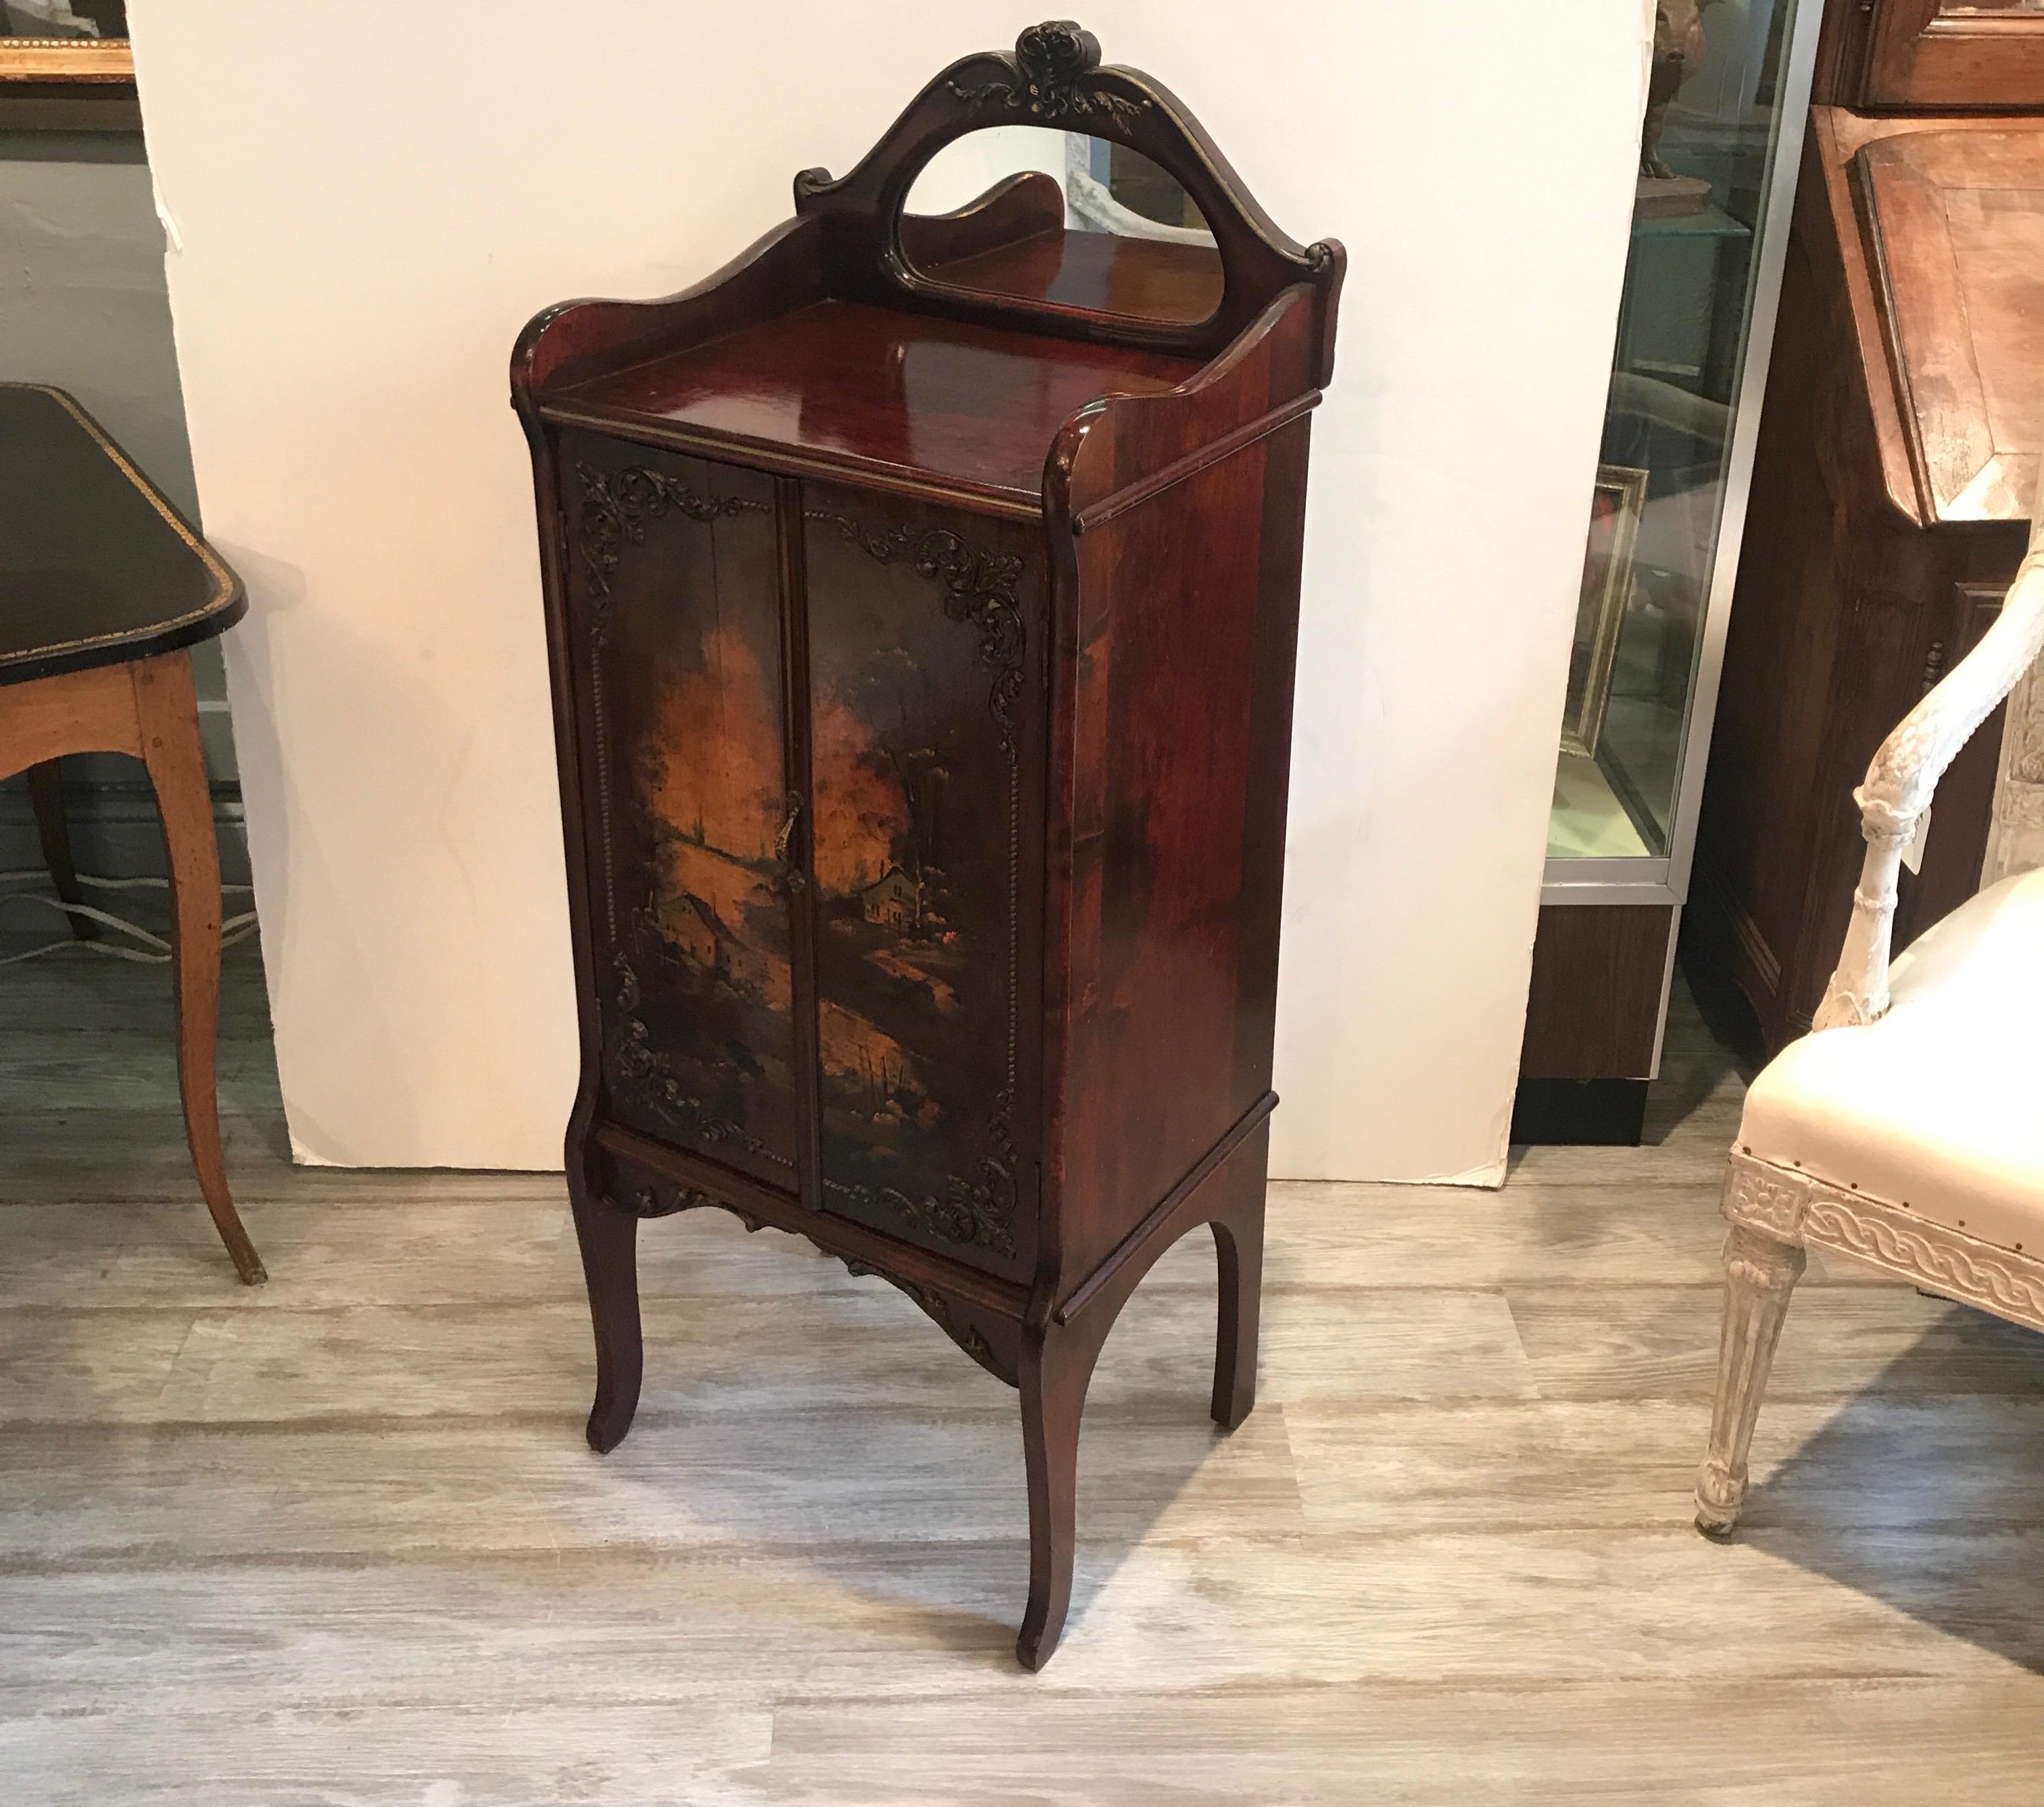 Solid mahogany music cabinet stand with hand painted decoration. The front doors open to reveal six shelves for sheet music storage. The top with mirrored insert. The front doors with a hand painted cottage scene.